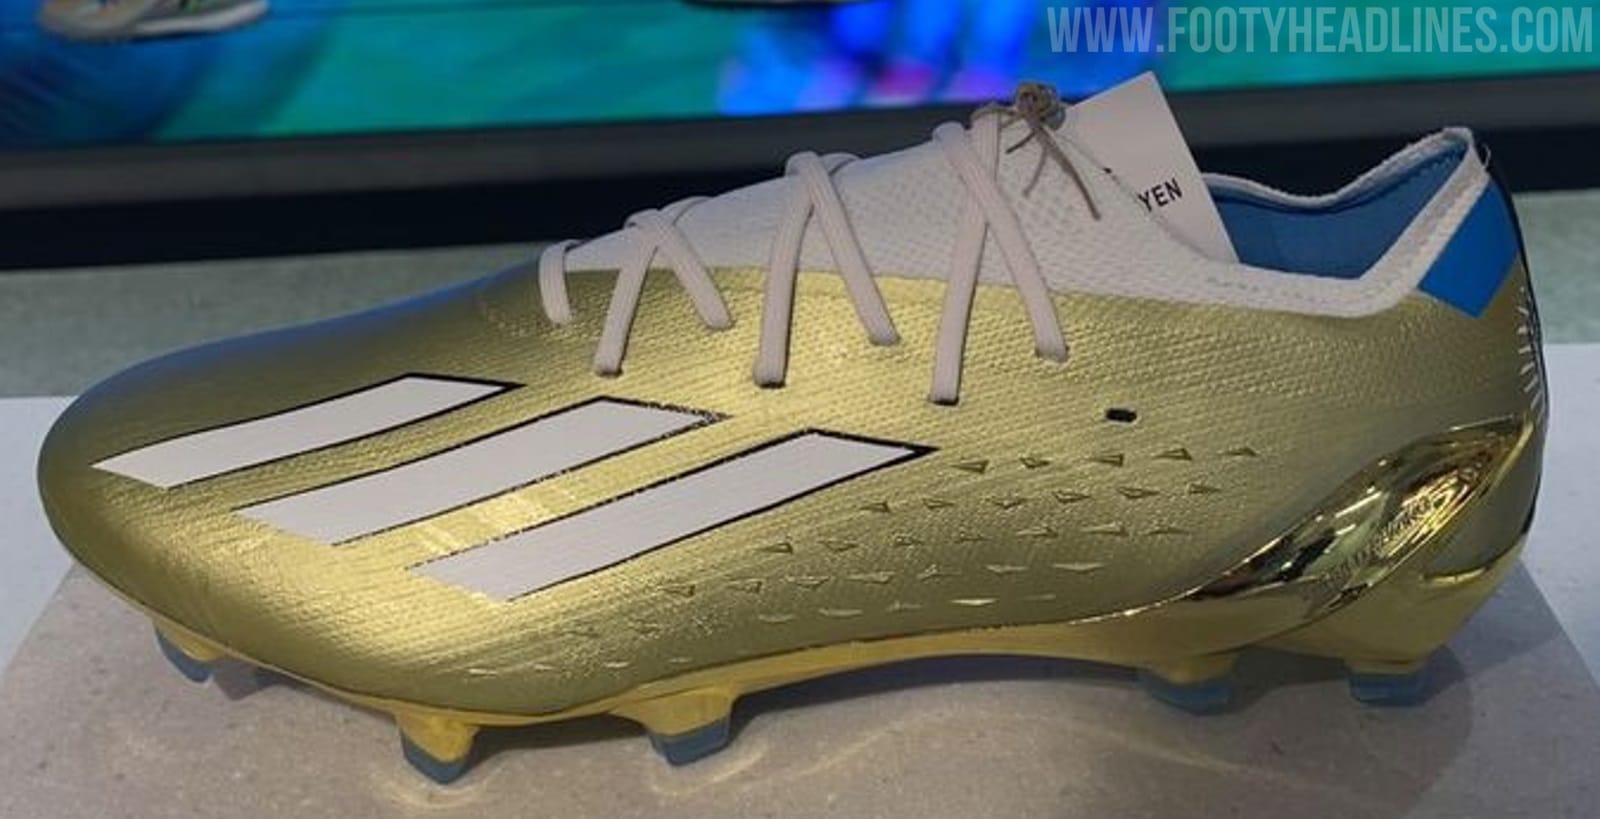 Lionel Messi's World Cup Boots: Messi's boots Adidas for FIFA World Cup revealed